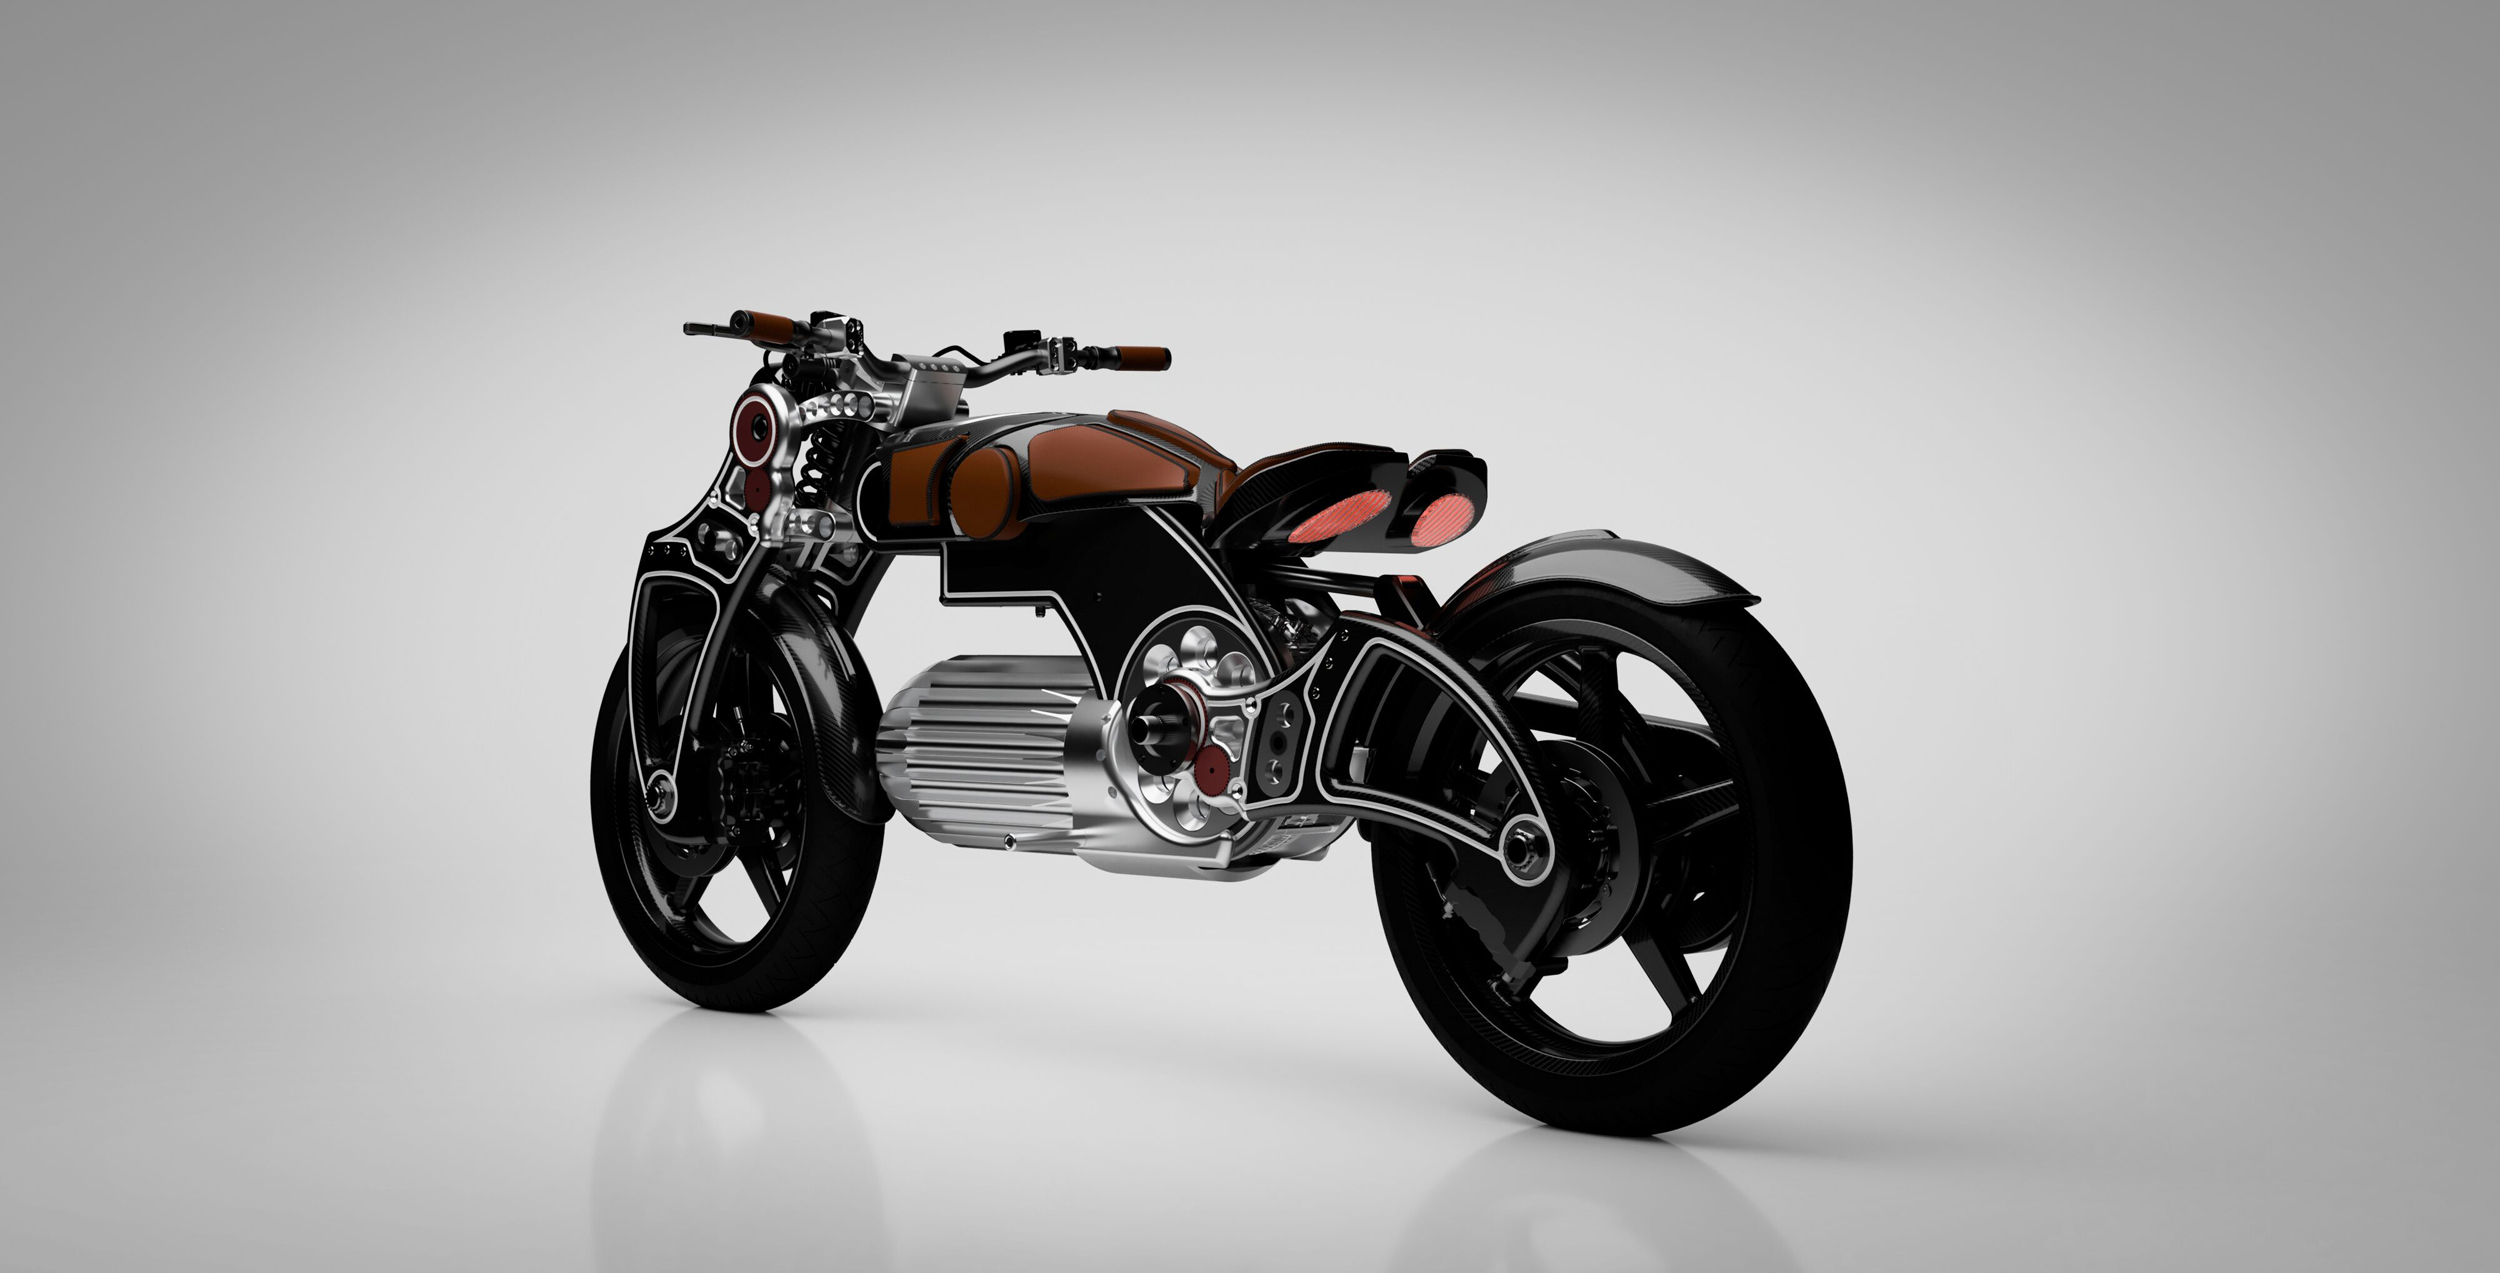 Curtiss Motorcycle Co.- Hades